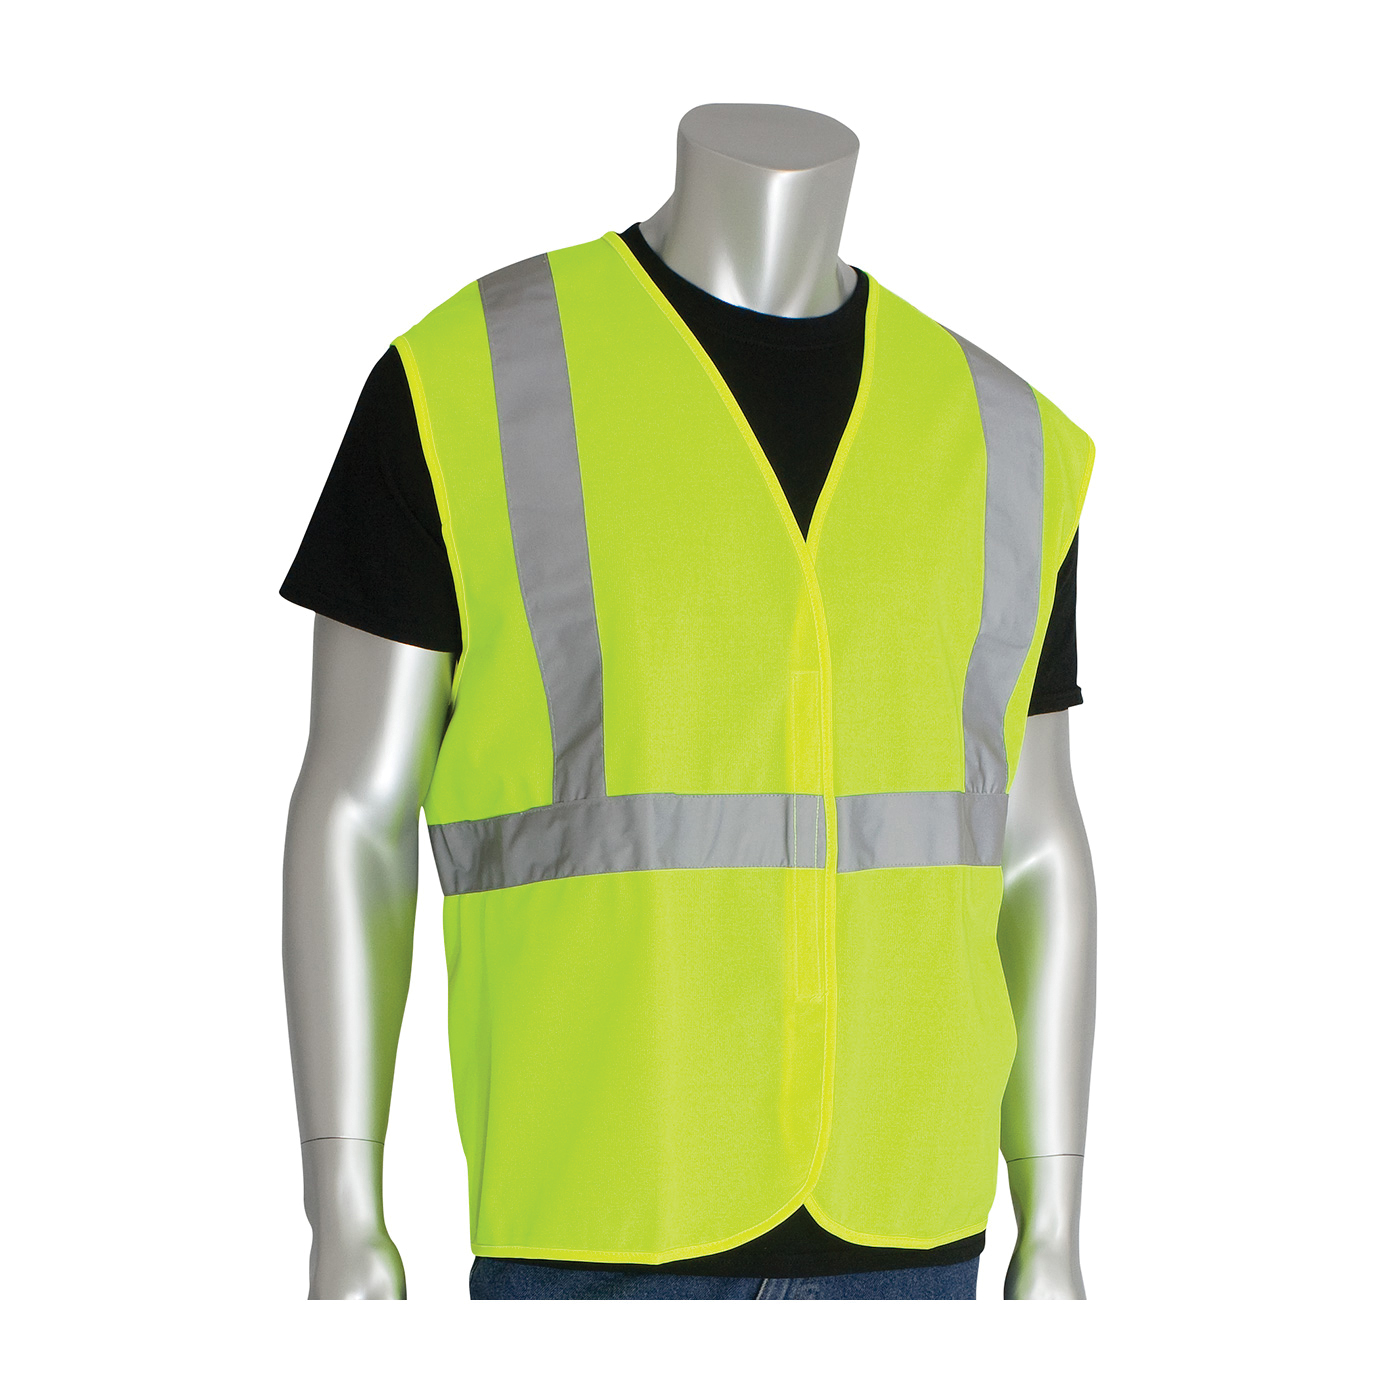 PIP® 302-WCENGLY-S Solid Vest, S, Hi-Viz Lime Yellow, Polyester, Hook and Loop Closure, ANSI Class: Class 2, Specifications Met: ANSI 107 Type R